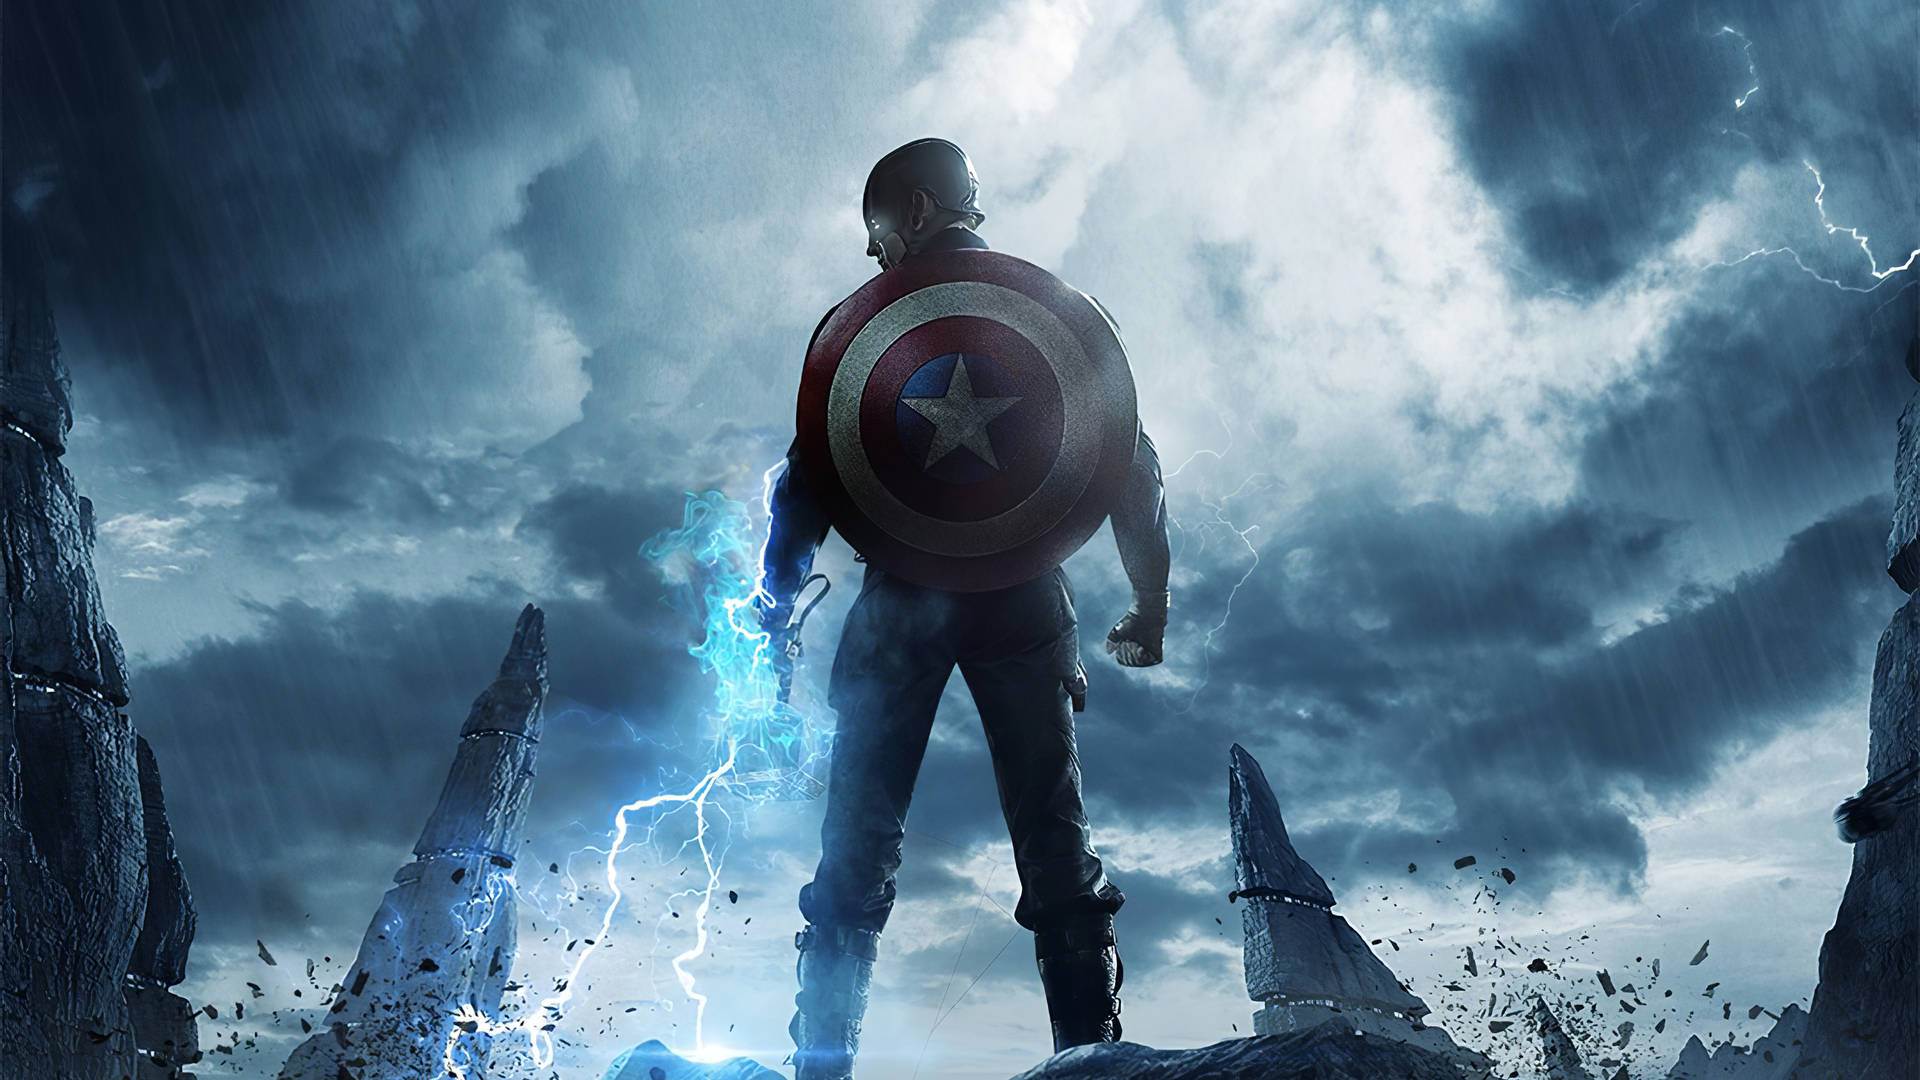 Avengers End Game Captain America Laptop Background